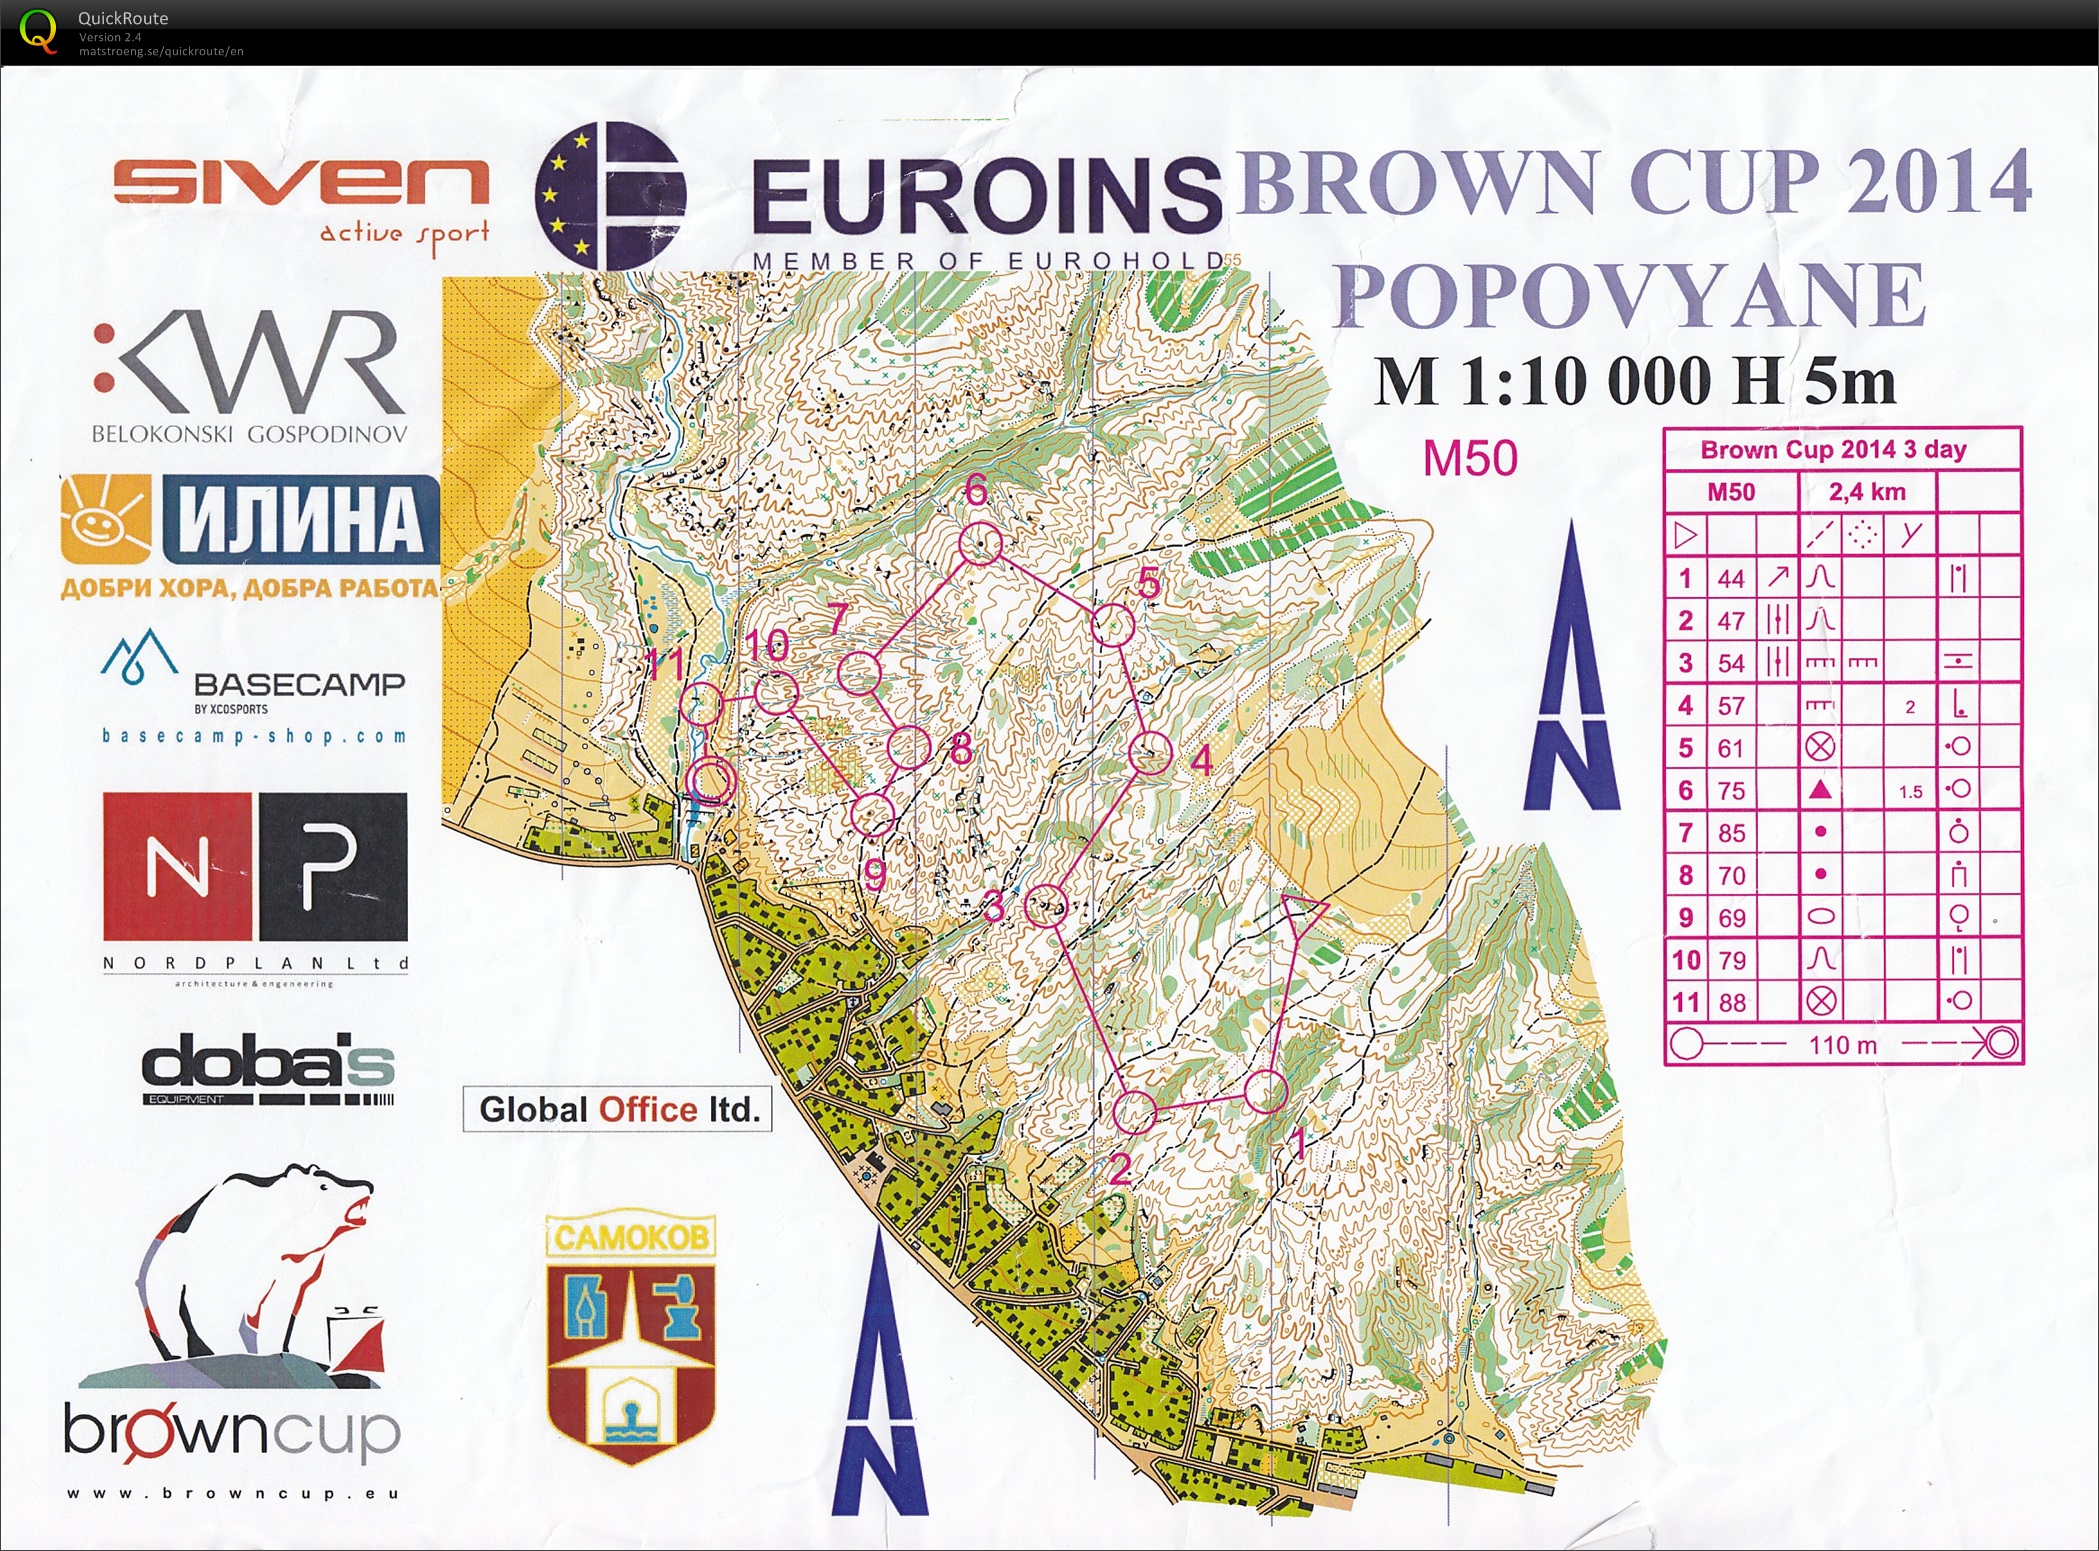 Brown-Cup 2014 E3 (05-05-2014)